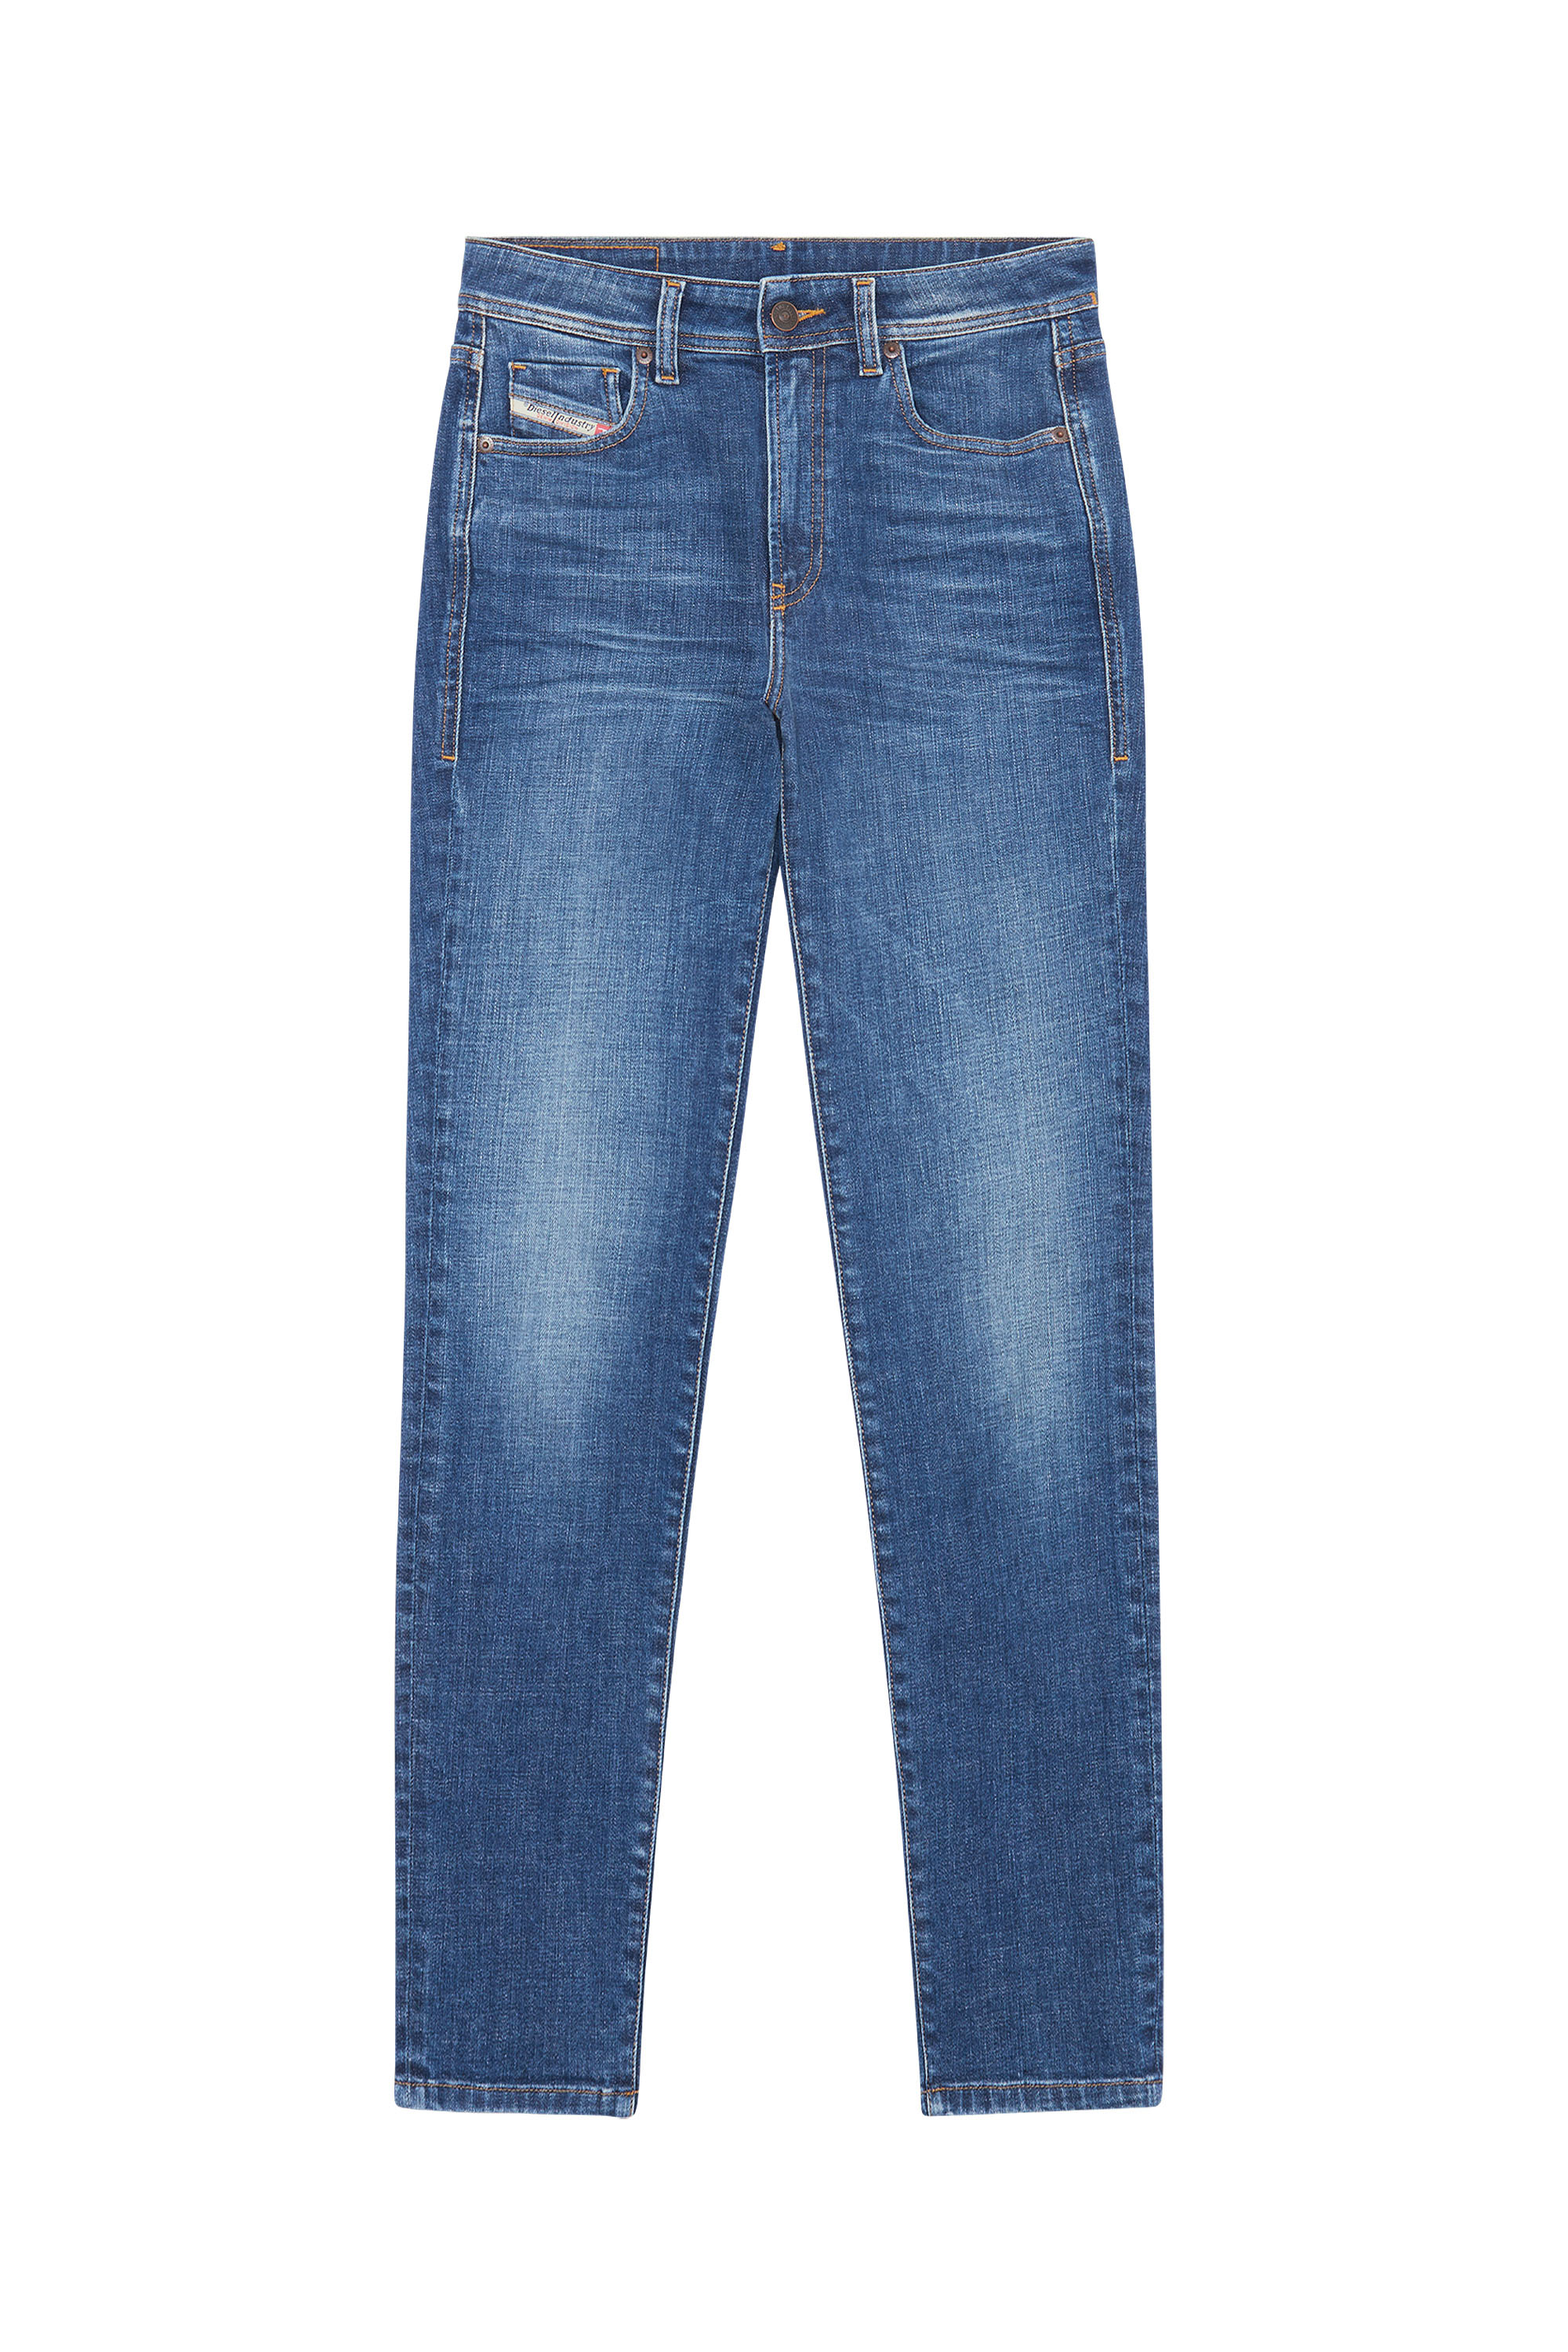 2004 09D46 Tapered Jeans, Blu medio - Jeans